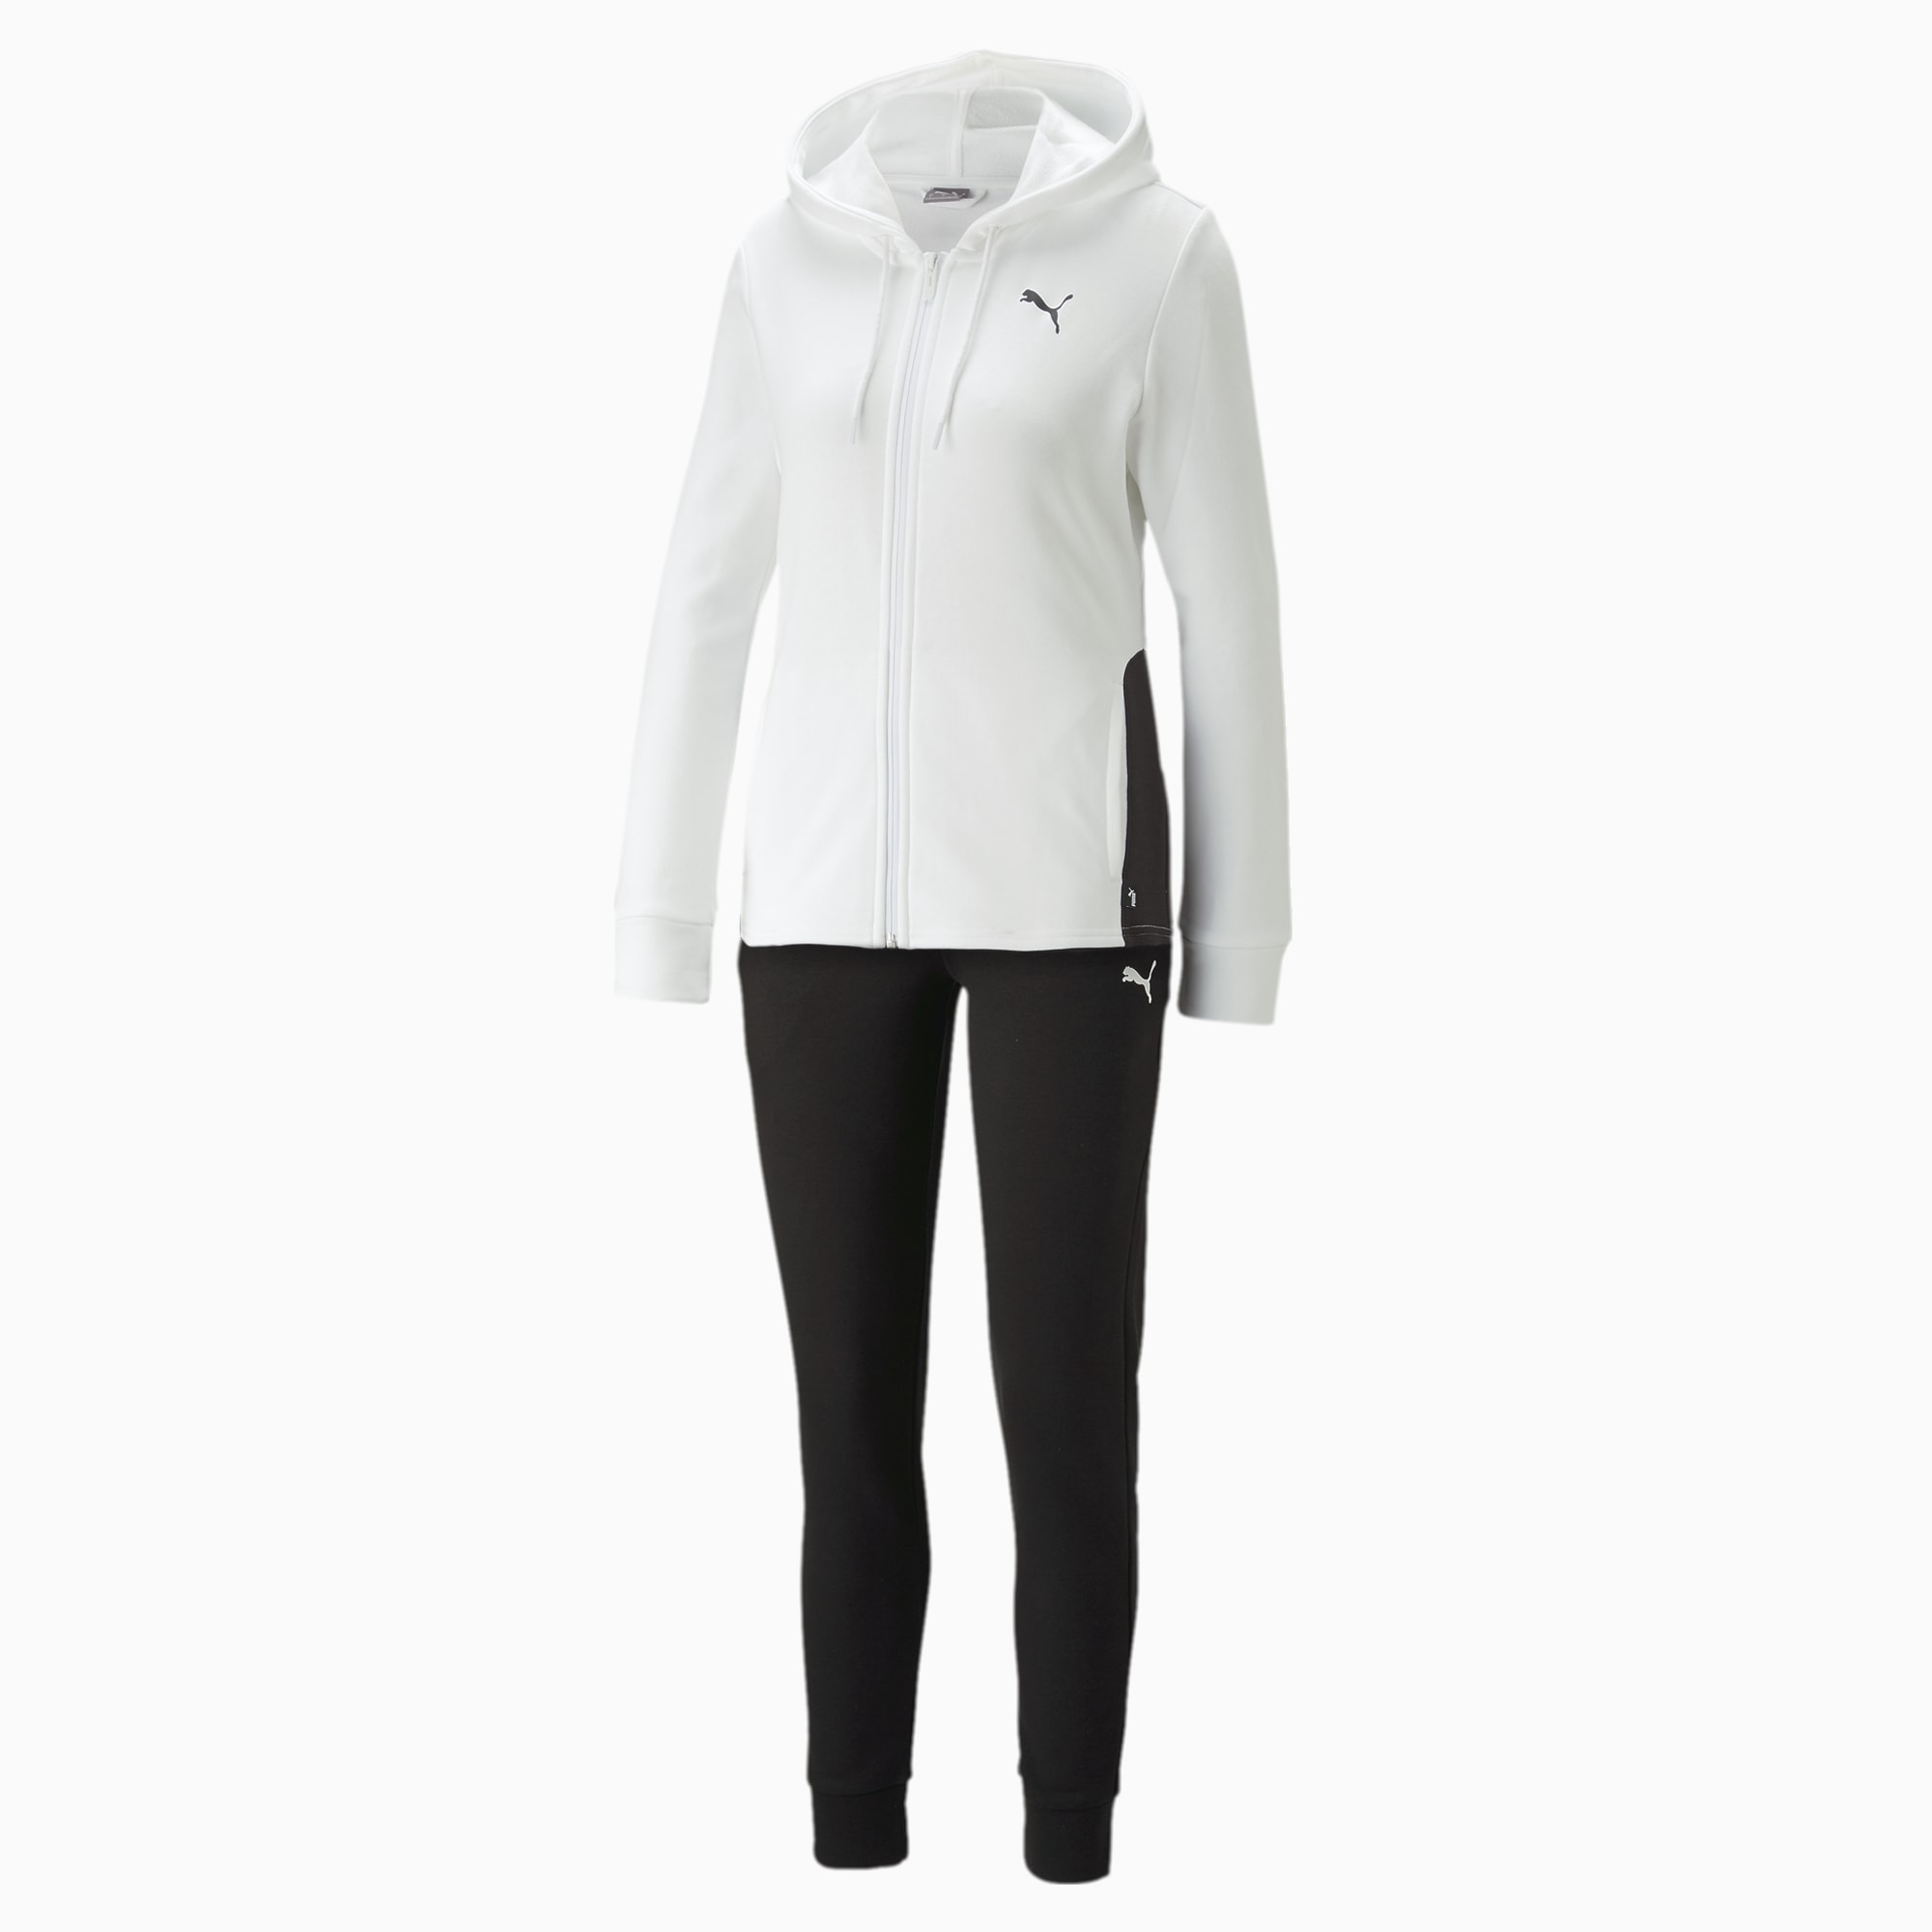 PUMA Classic Hooded Tracksuit Women, White, Size L, Clothing